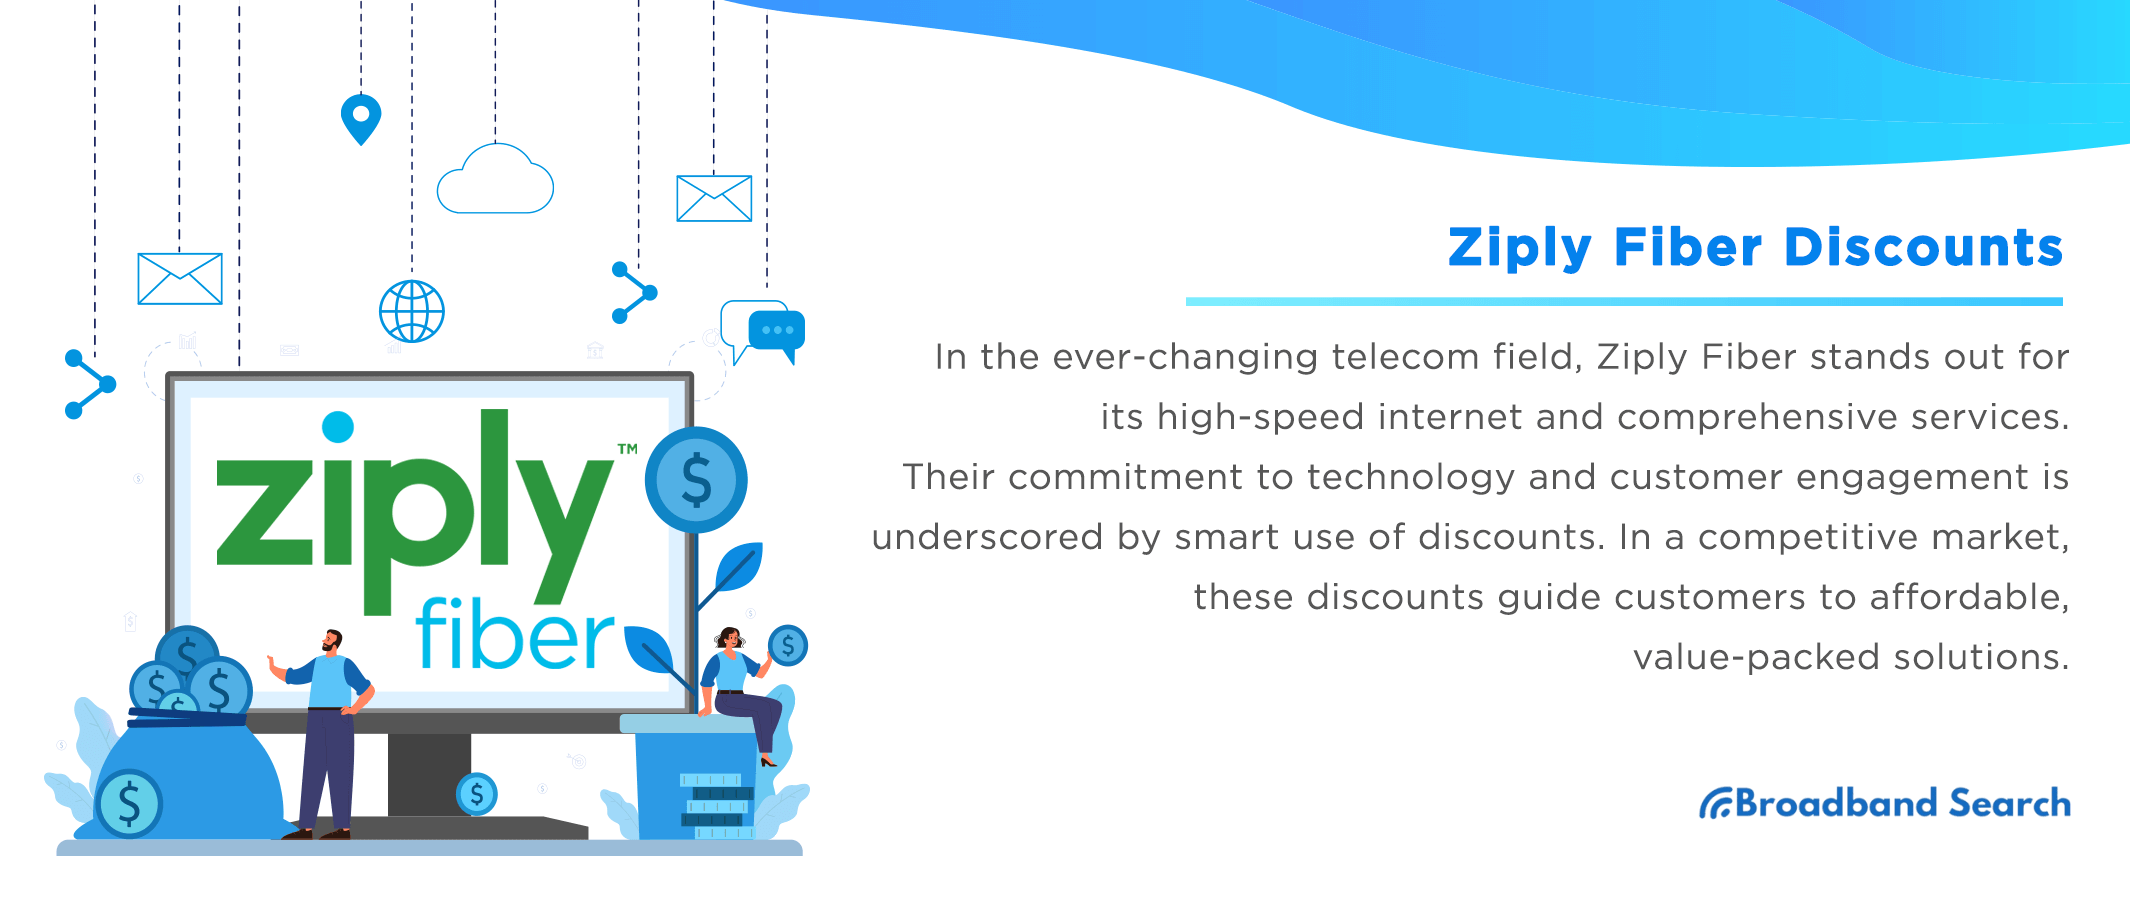 Save More With Ziply Fiber: Discount Packages and Tips 